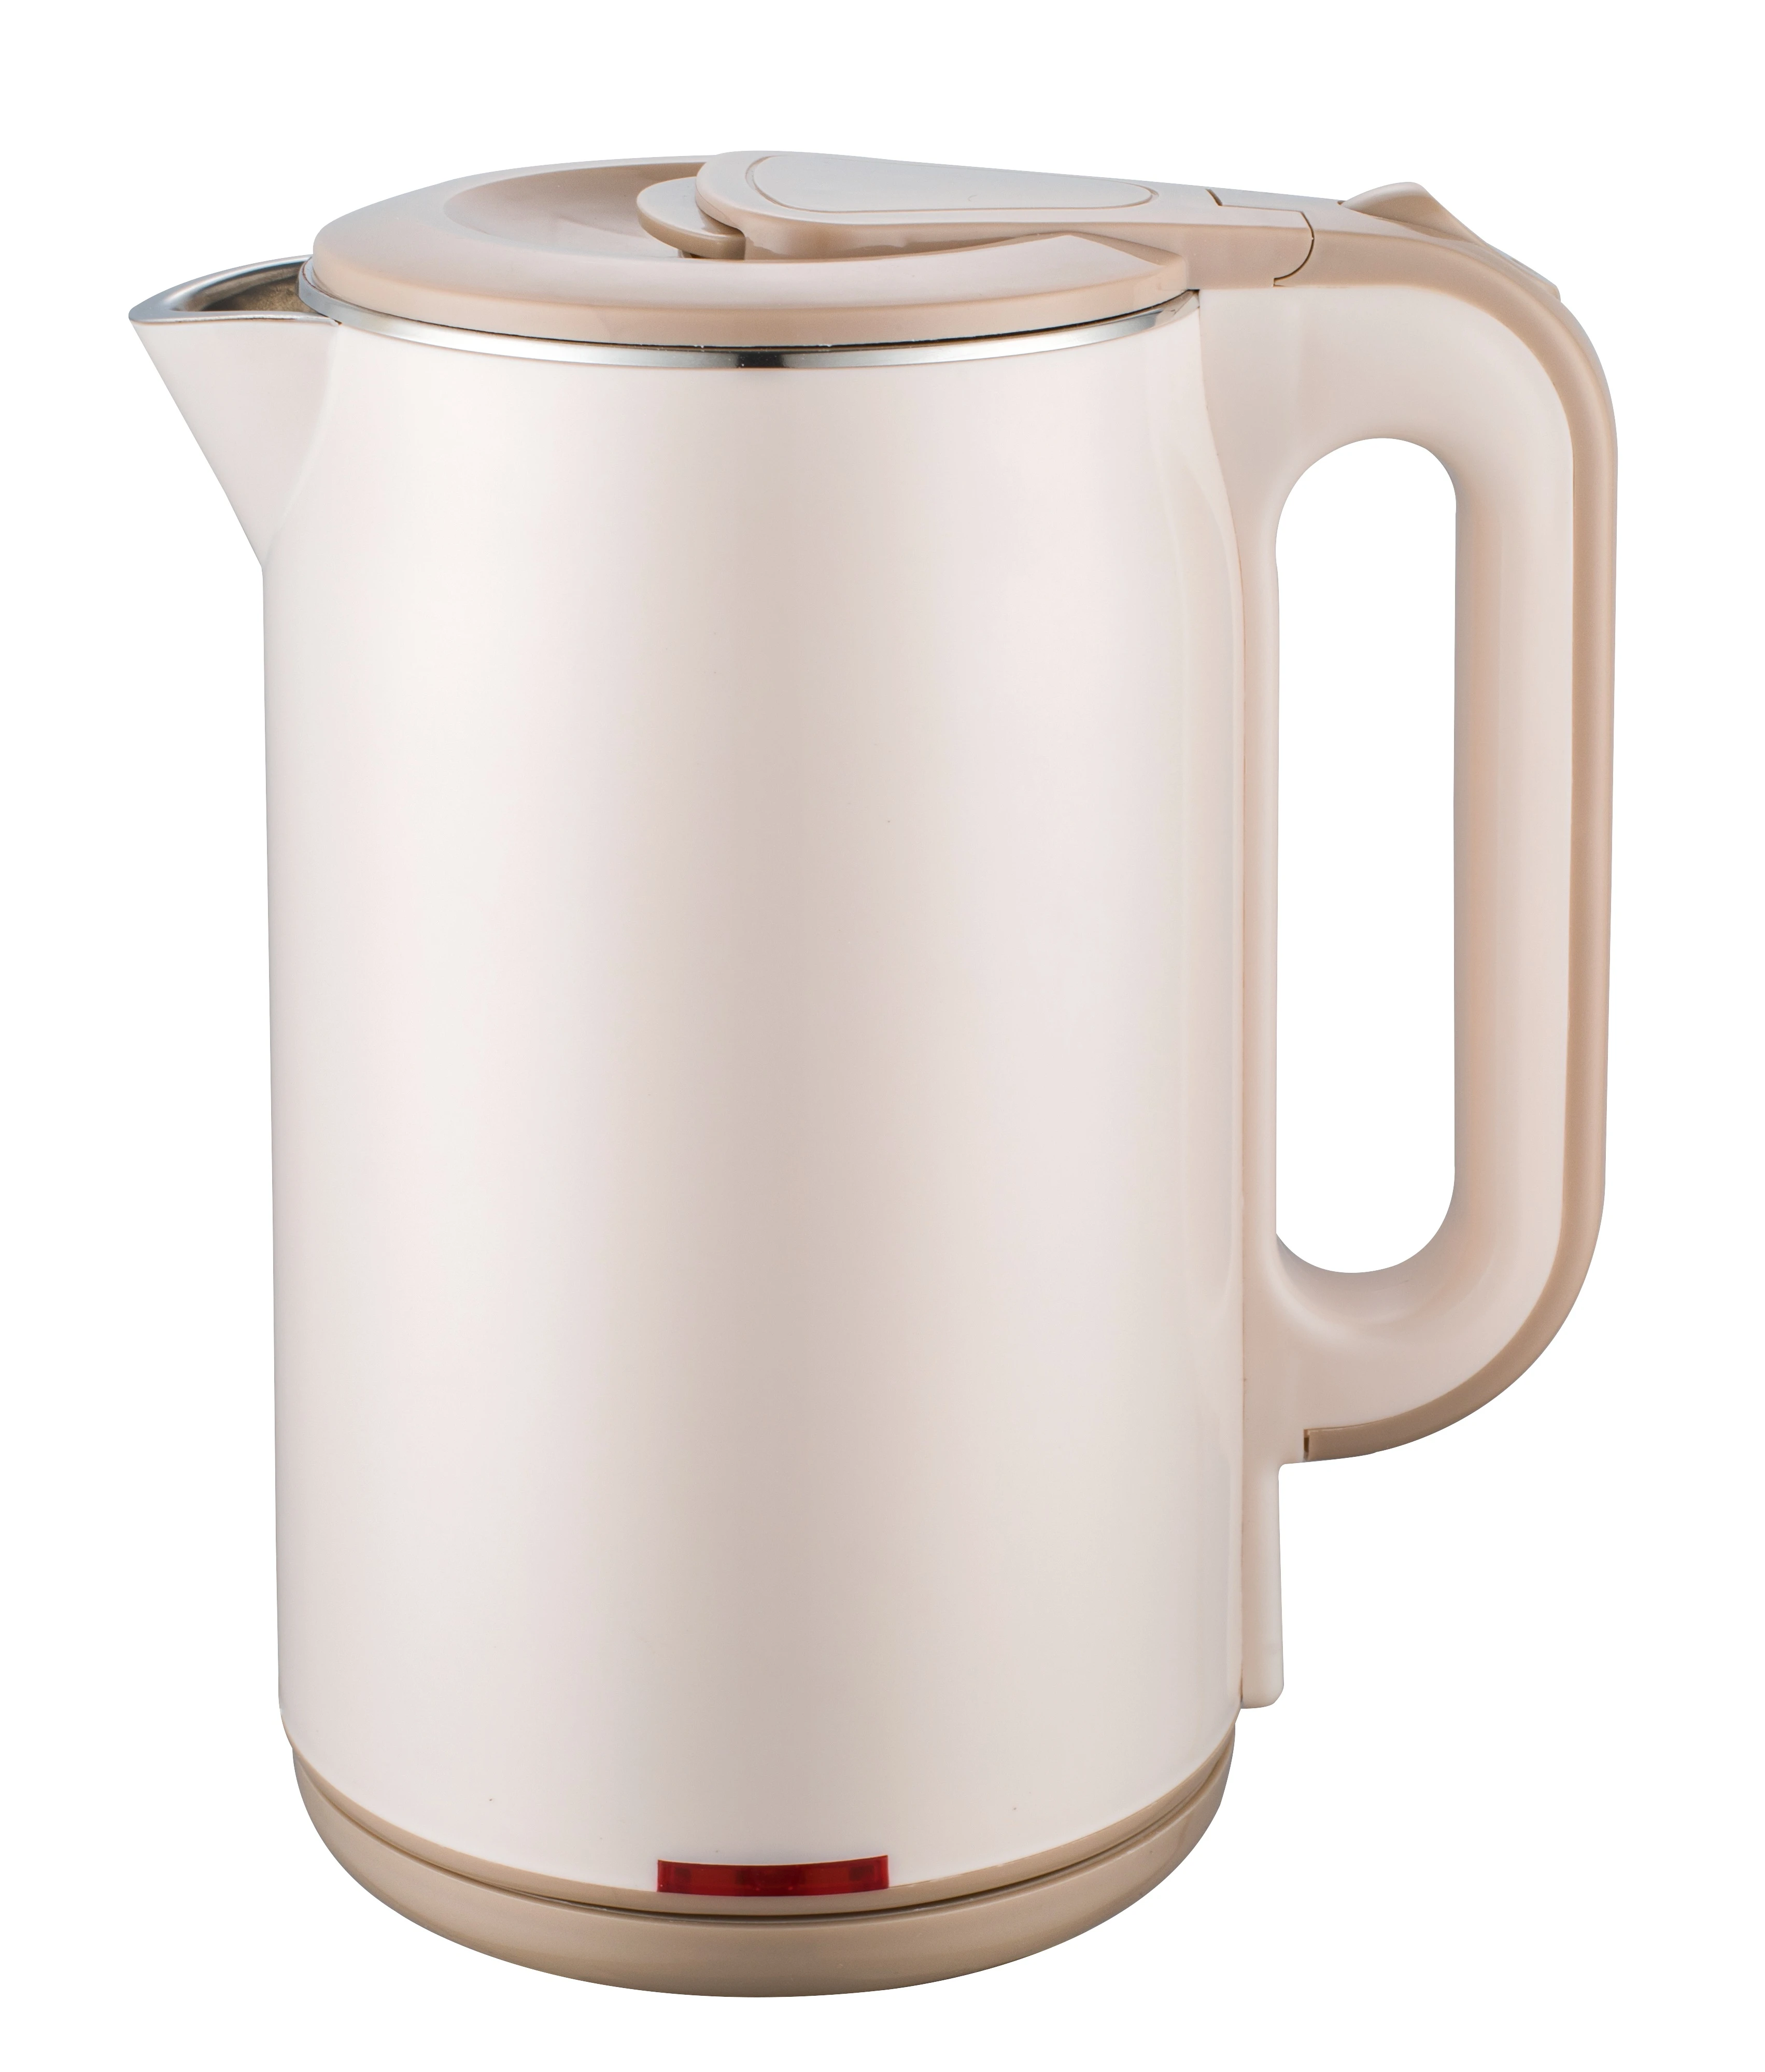 Large Capacity Double wall stainless steel home appliances electric kettle